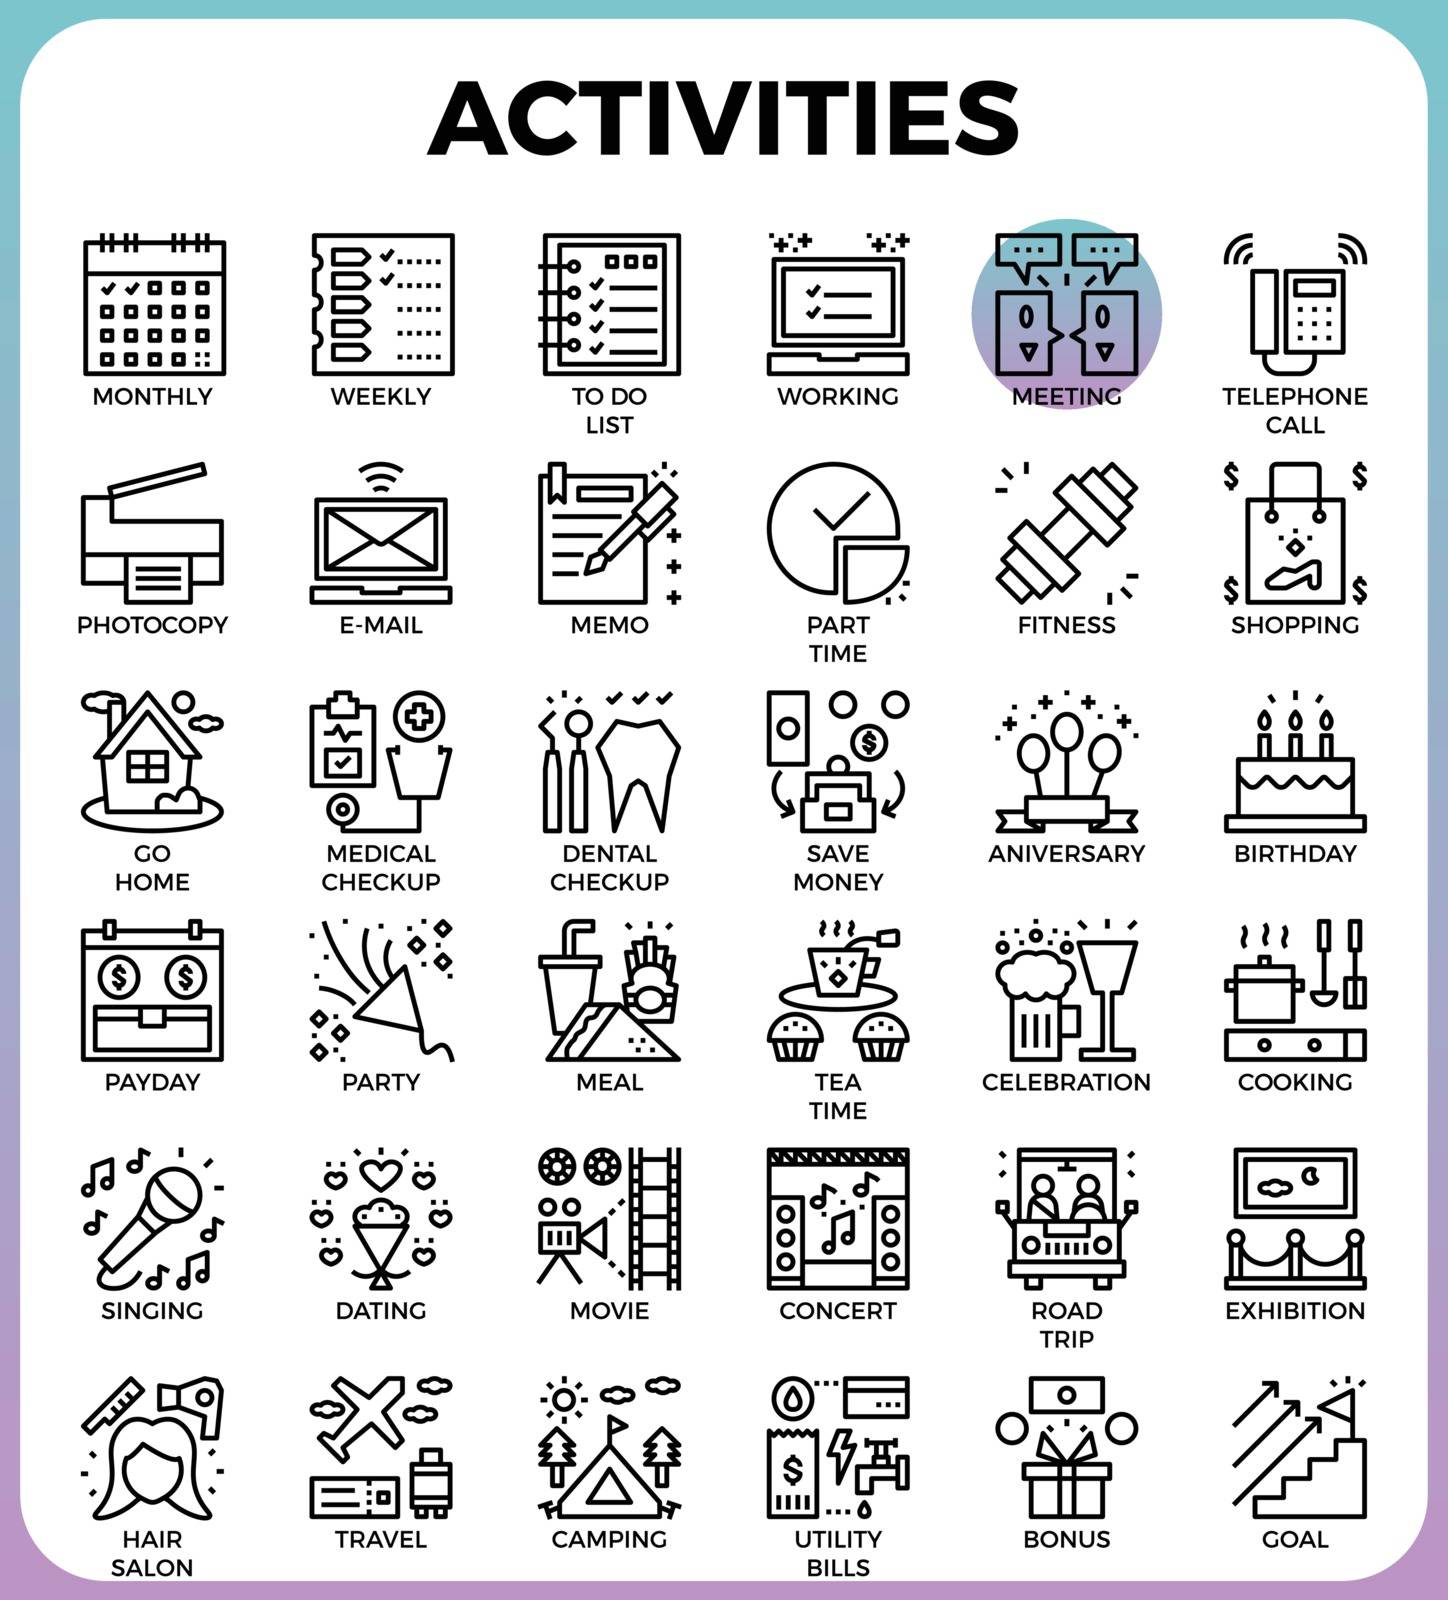 Daily Activities concept detailed line icons by nongpimmy